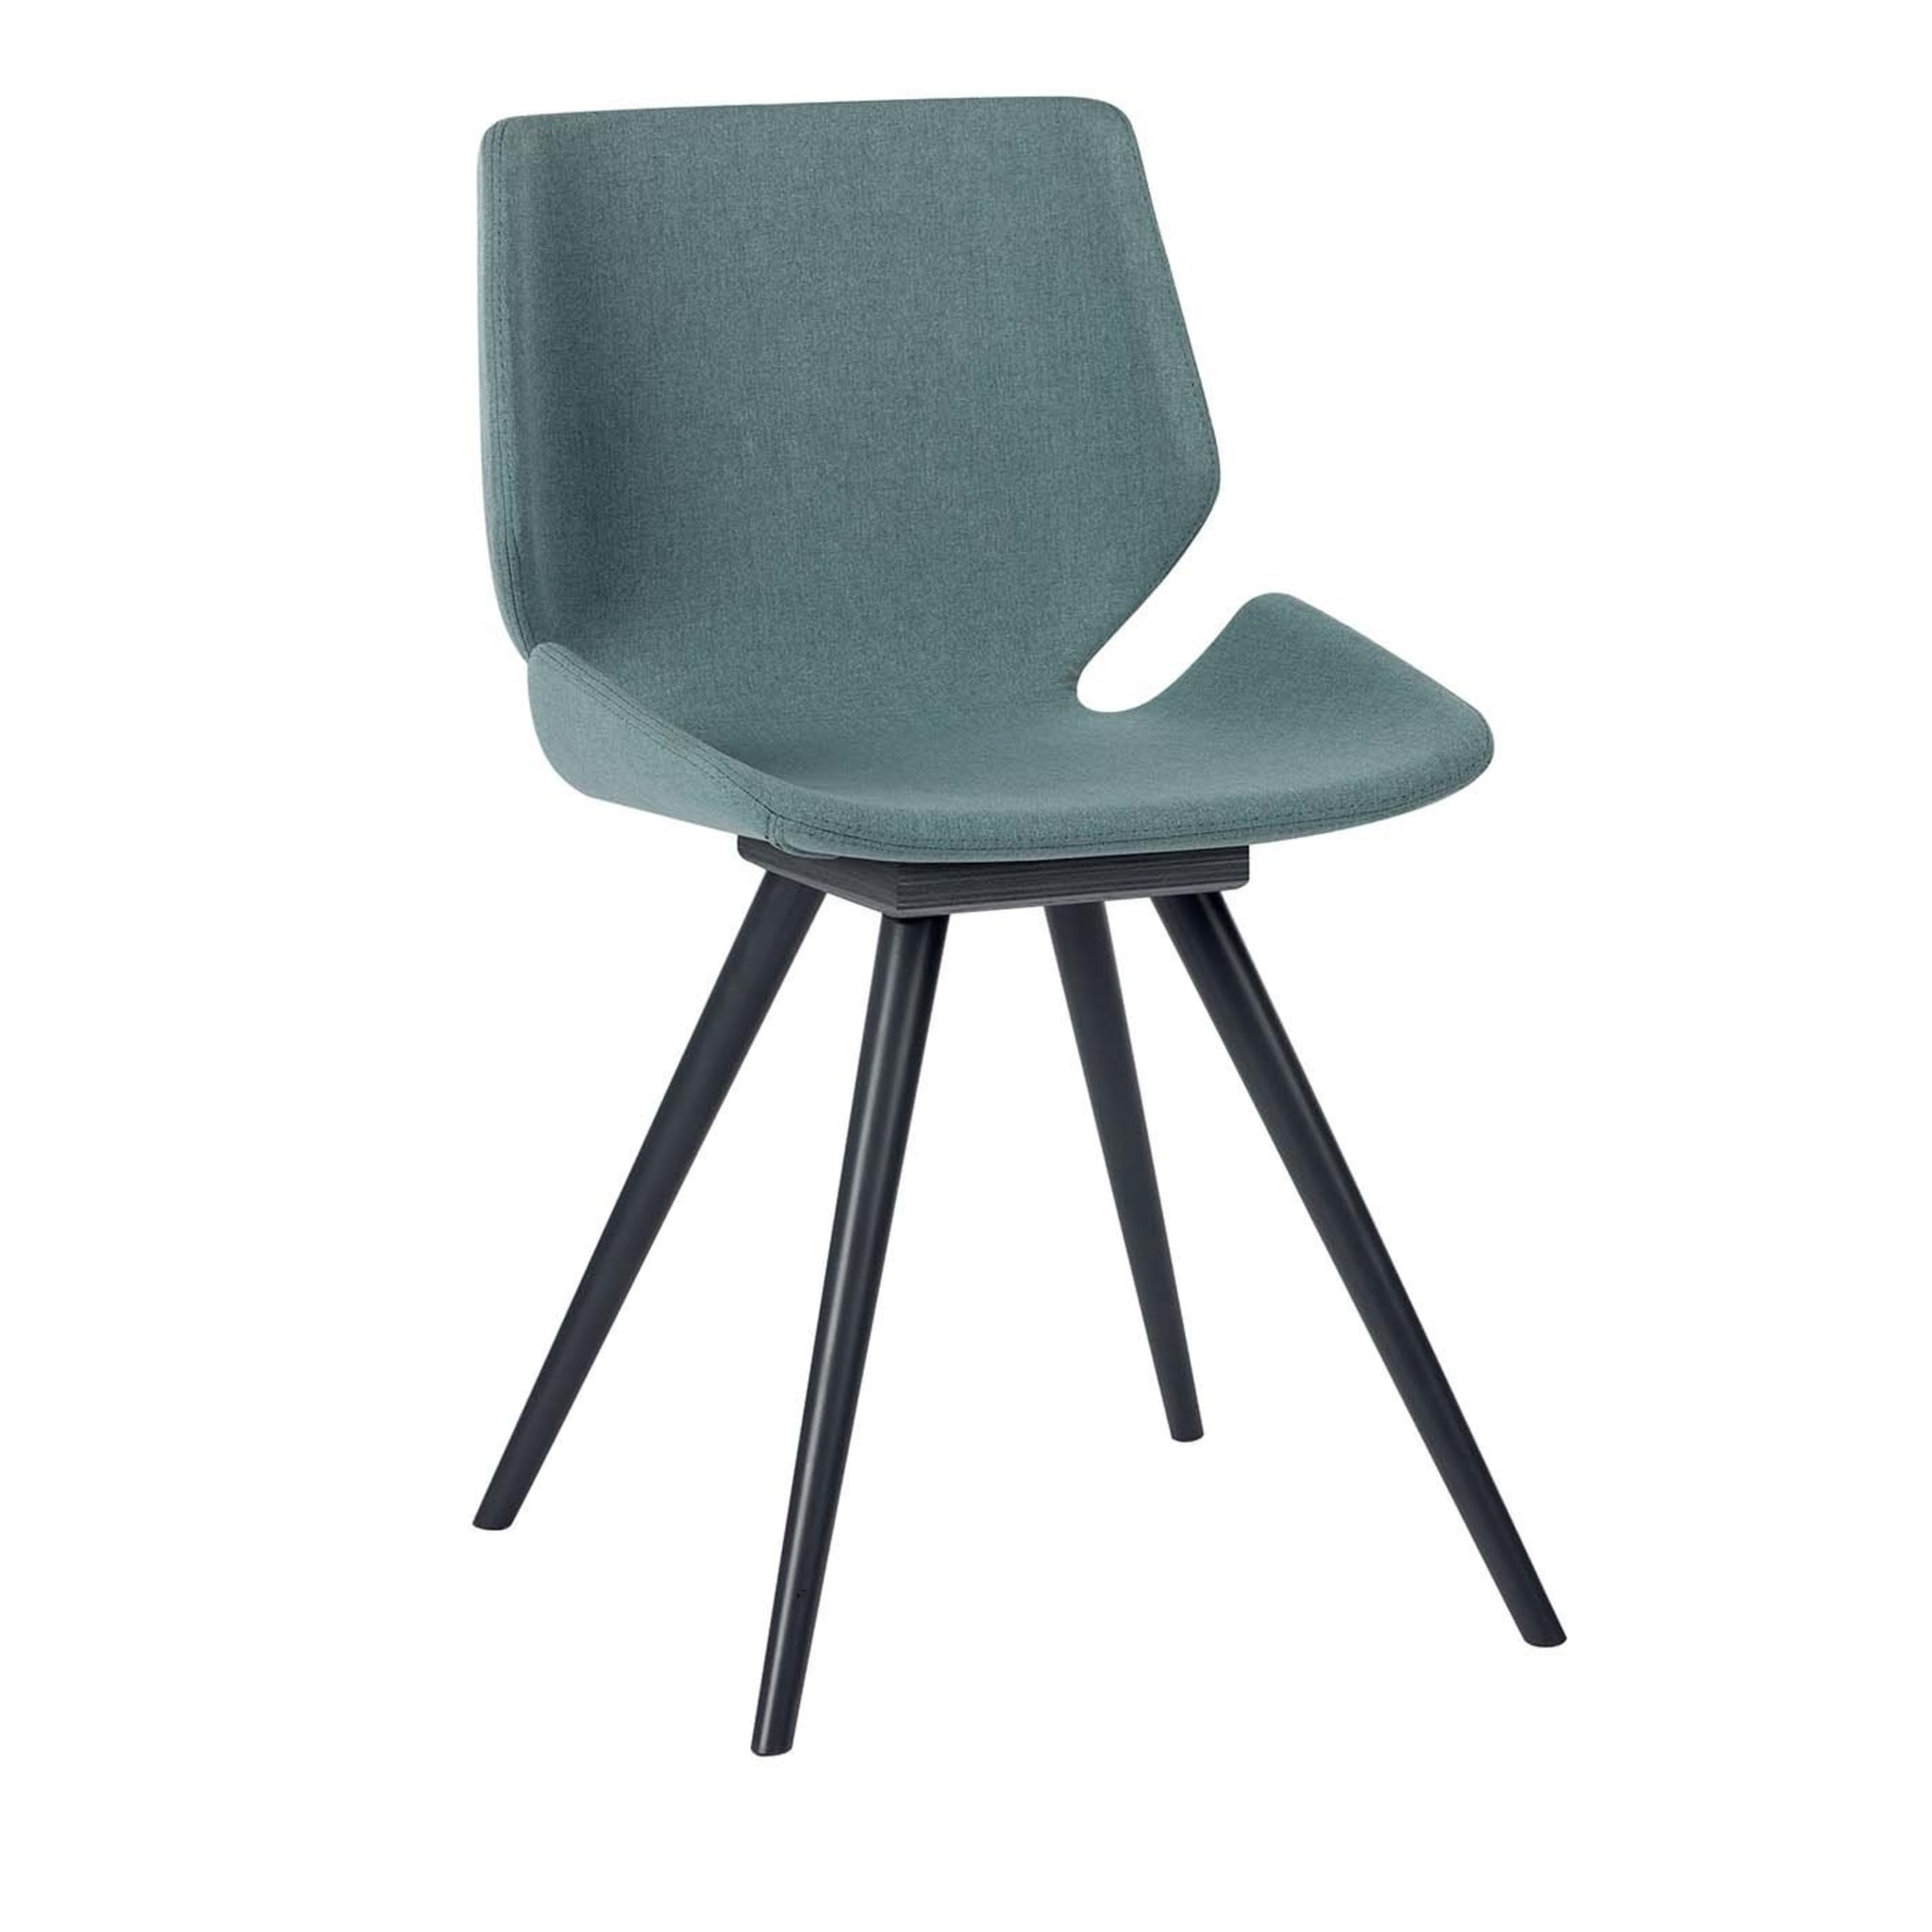 Set of 2 Meg Wood Chair Green and Black - Main view